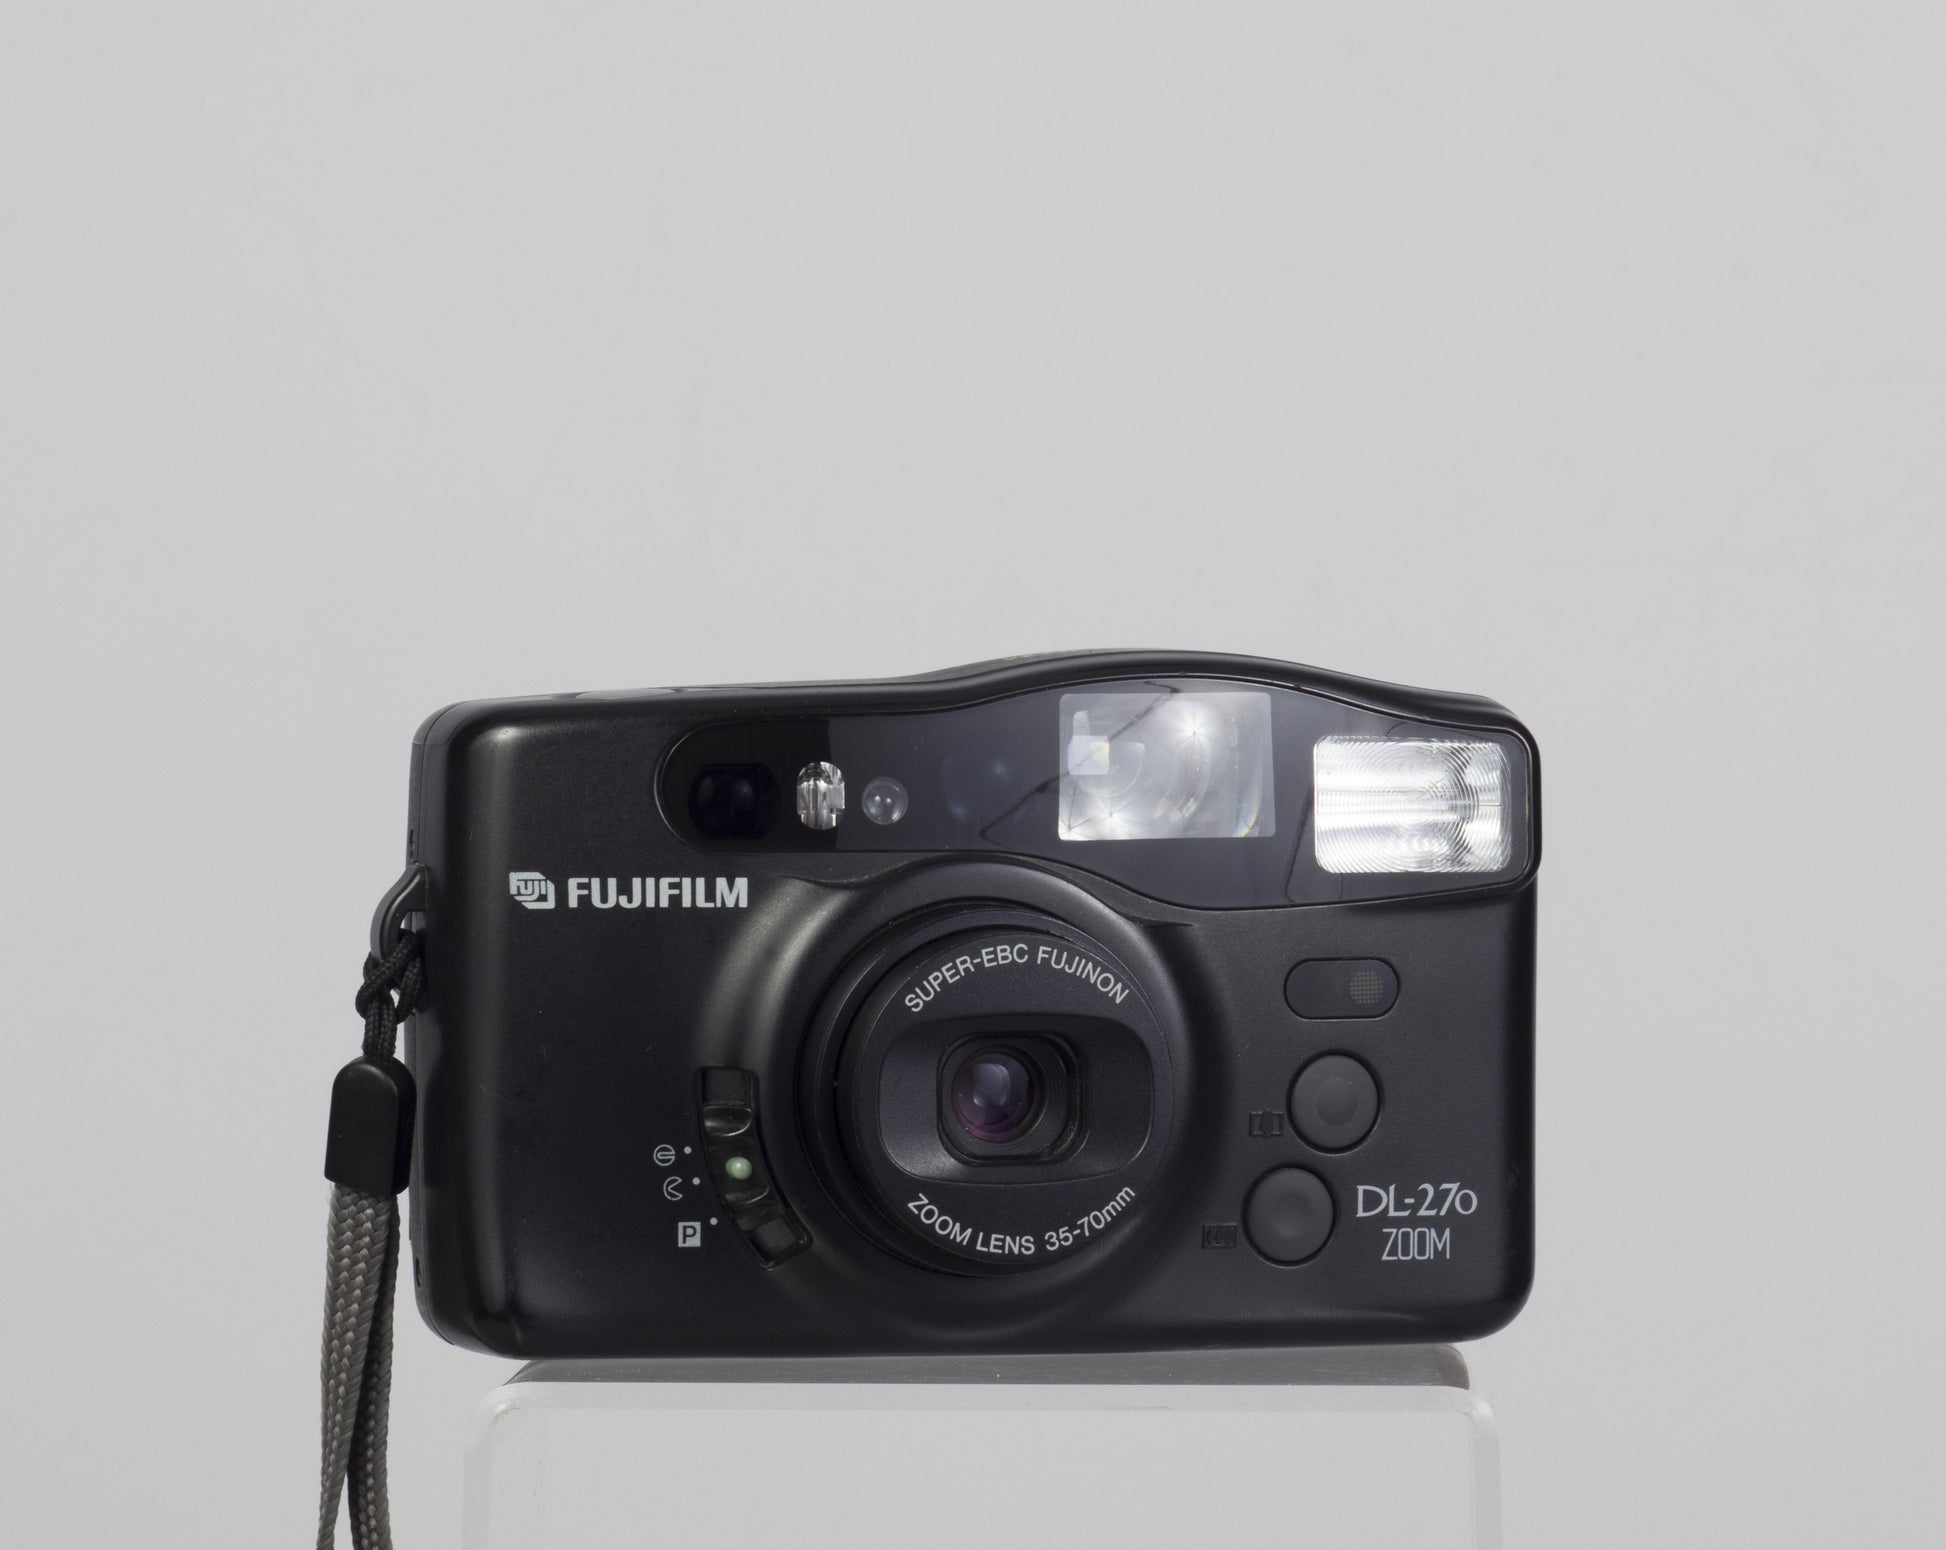 The Fujifilm DL-270 zoom 35mm point-and-shoot camera